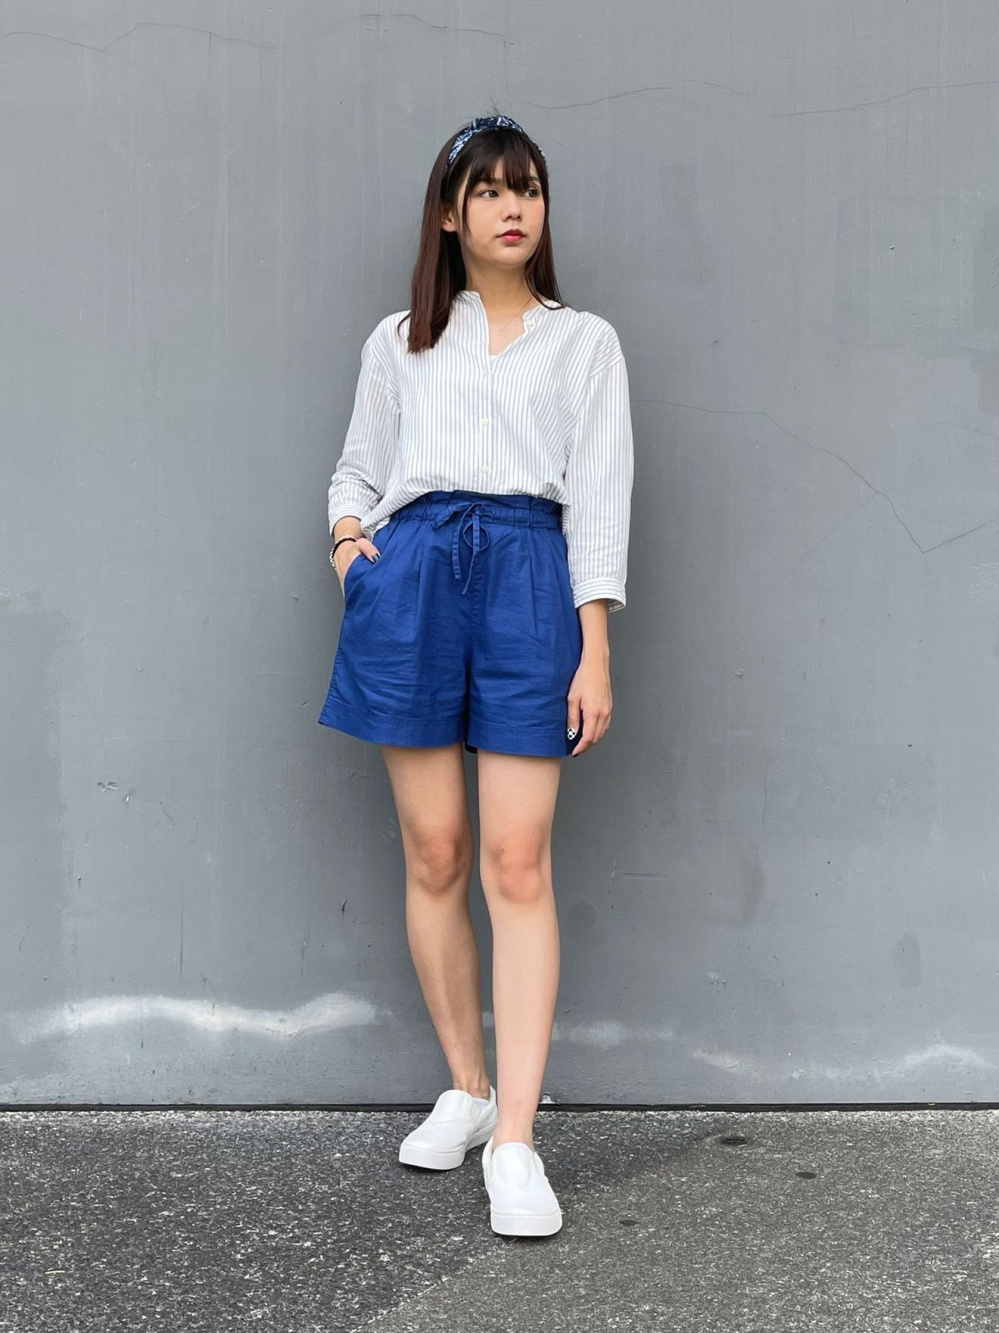 Check styling ideas for「Linen Cotton Shorts」